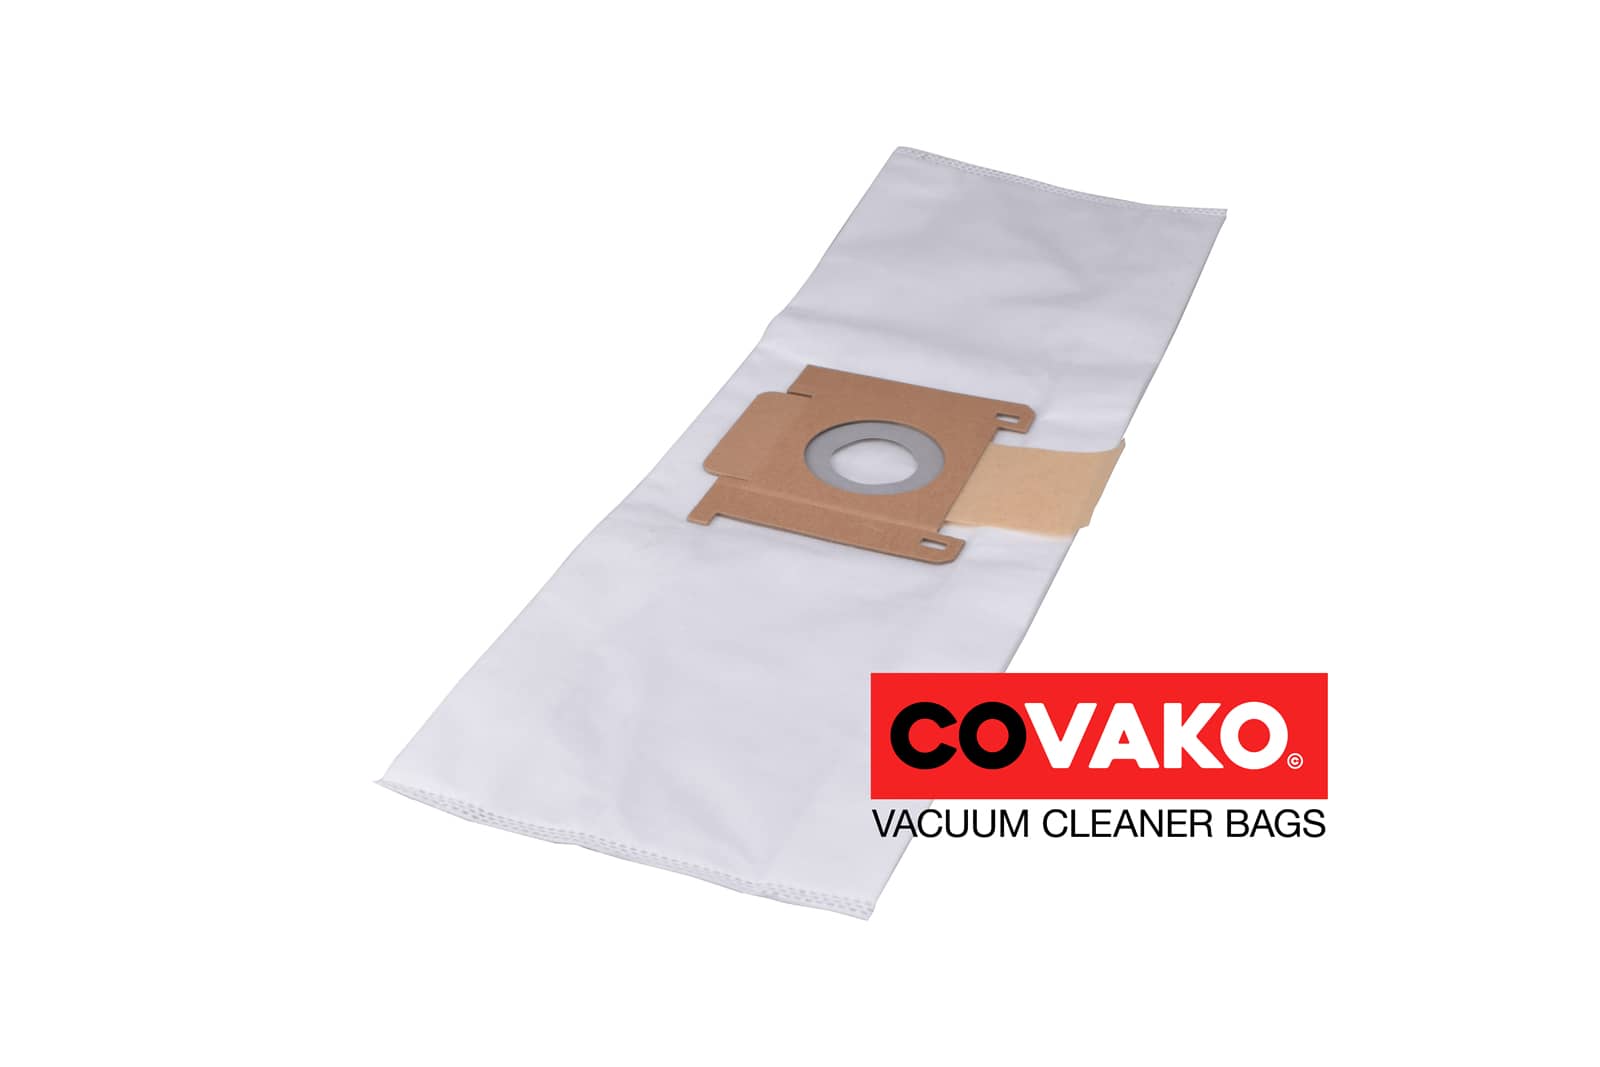 Fast i-vac C6 / Synthesis - Fast vacuum cleaner bags